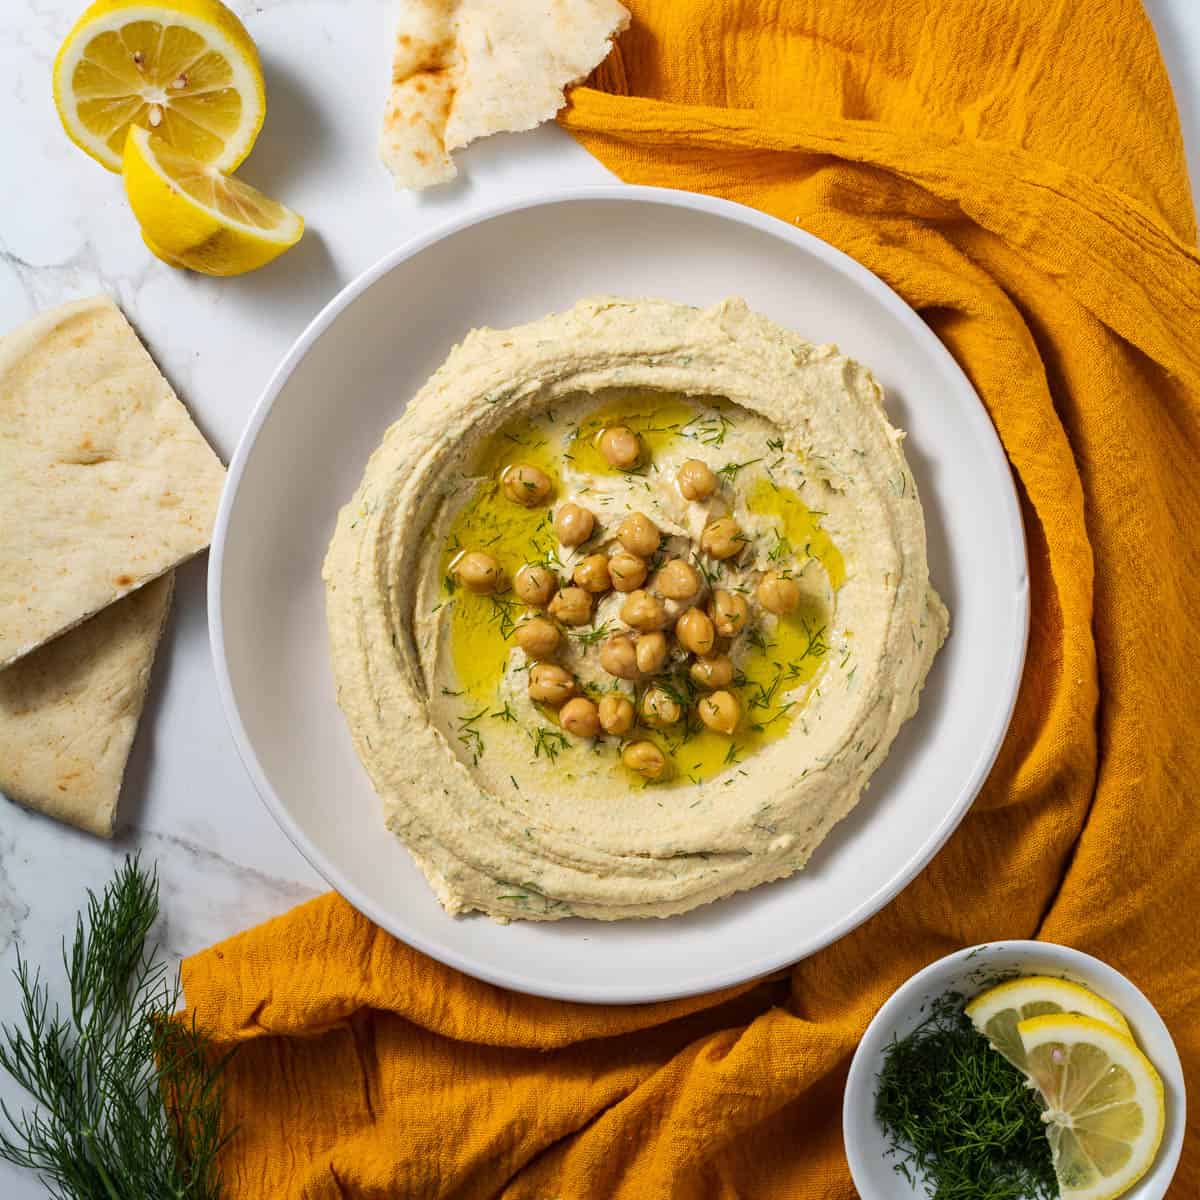 Overhead shot of hummus being served on a plate with a drizzle of olive oil